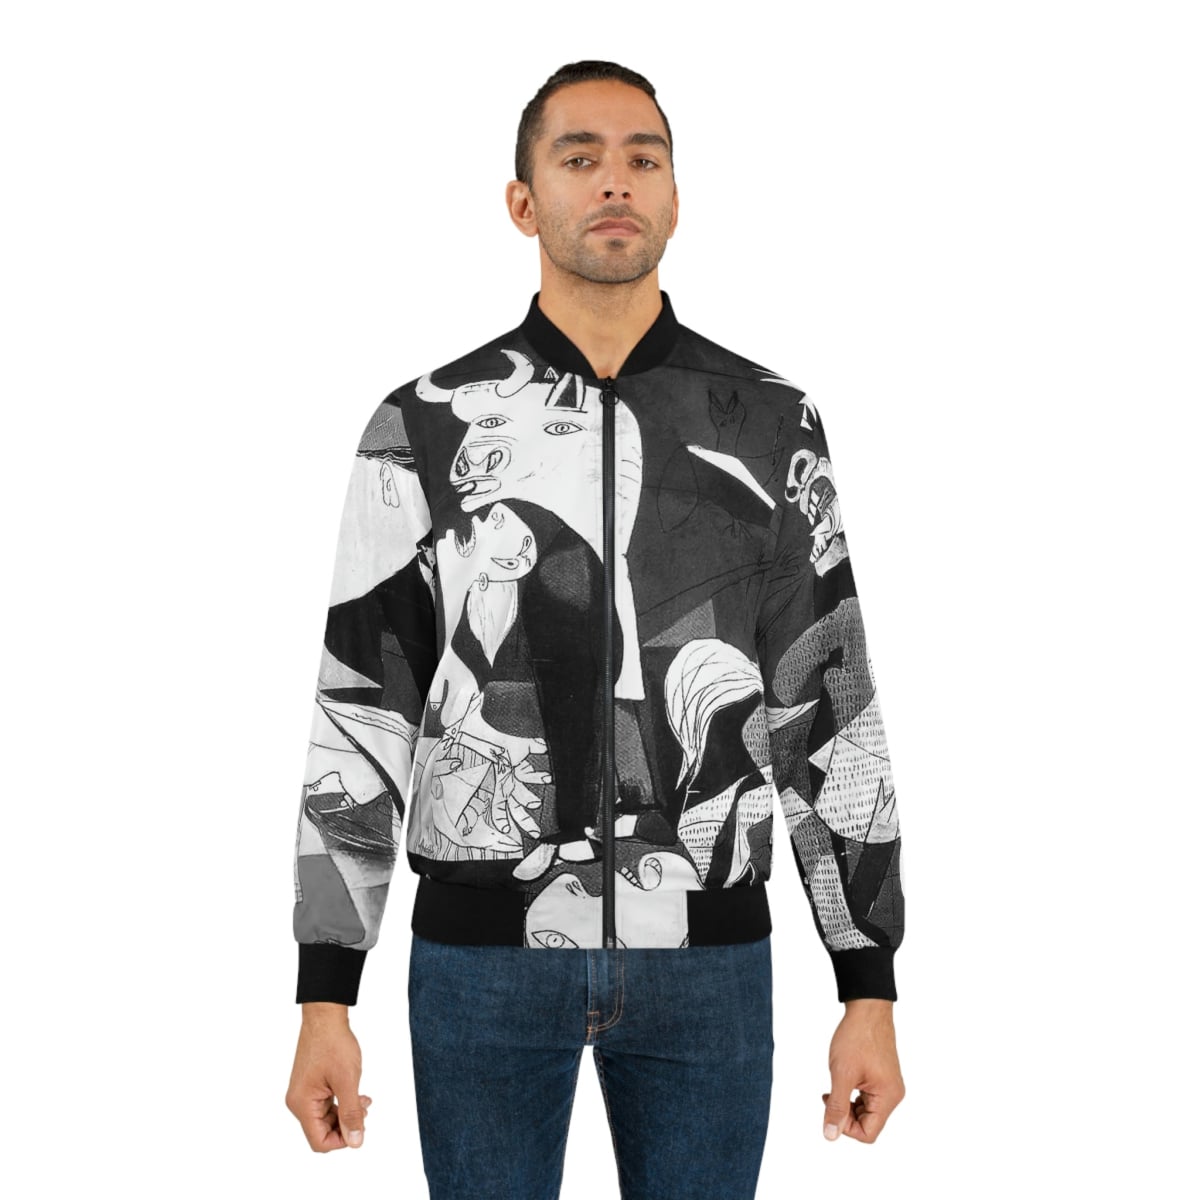 Guernica by Pablo Picasso Art Bomber Jacket